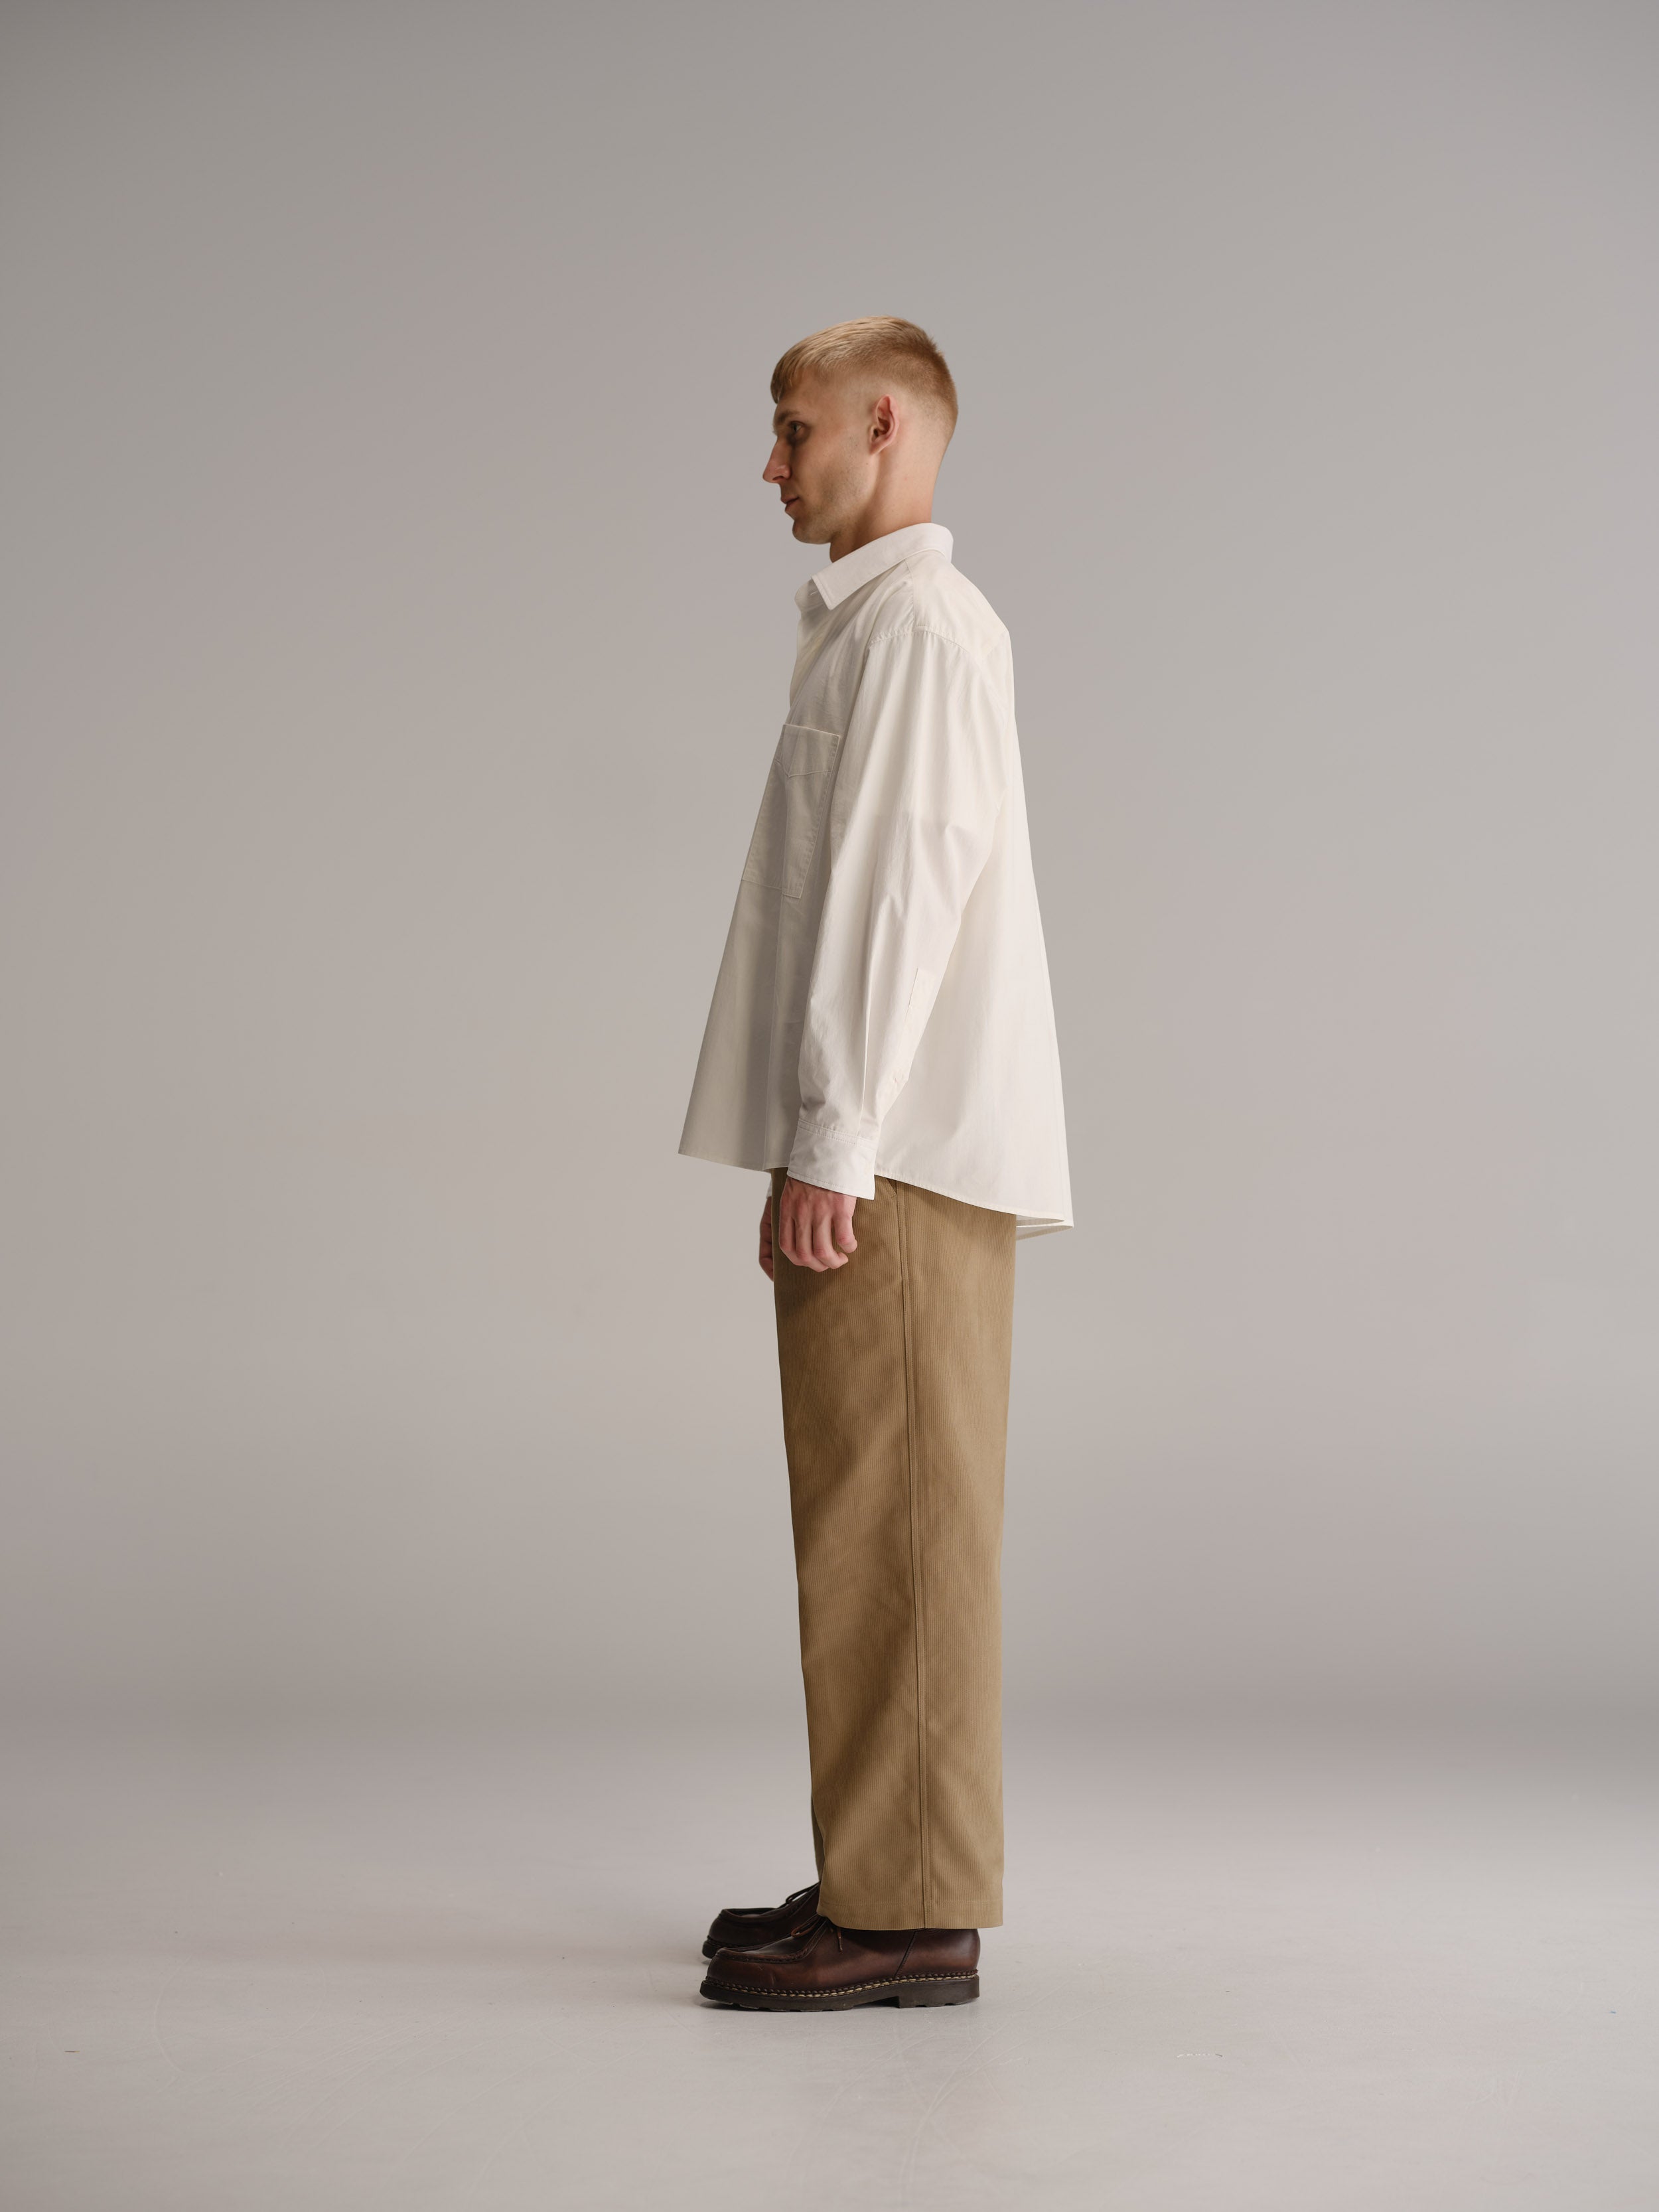 Side view of man standing in white studio wearing white shirt, fawn pants and brown leather shoes.